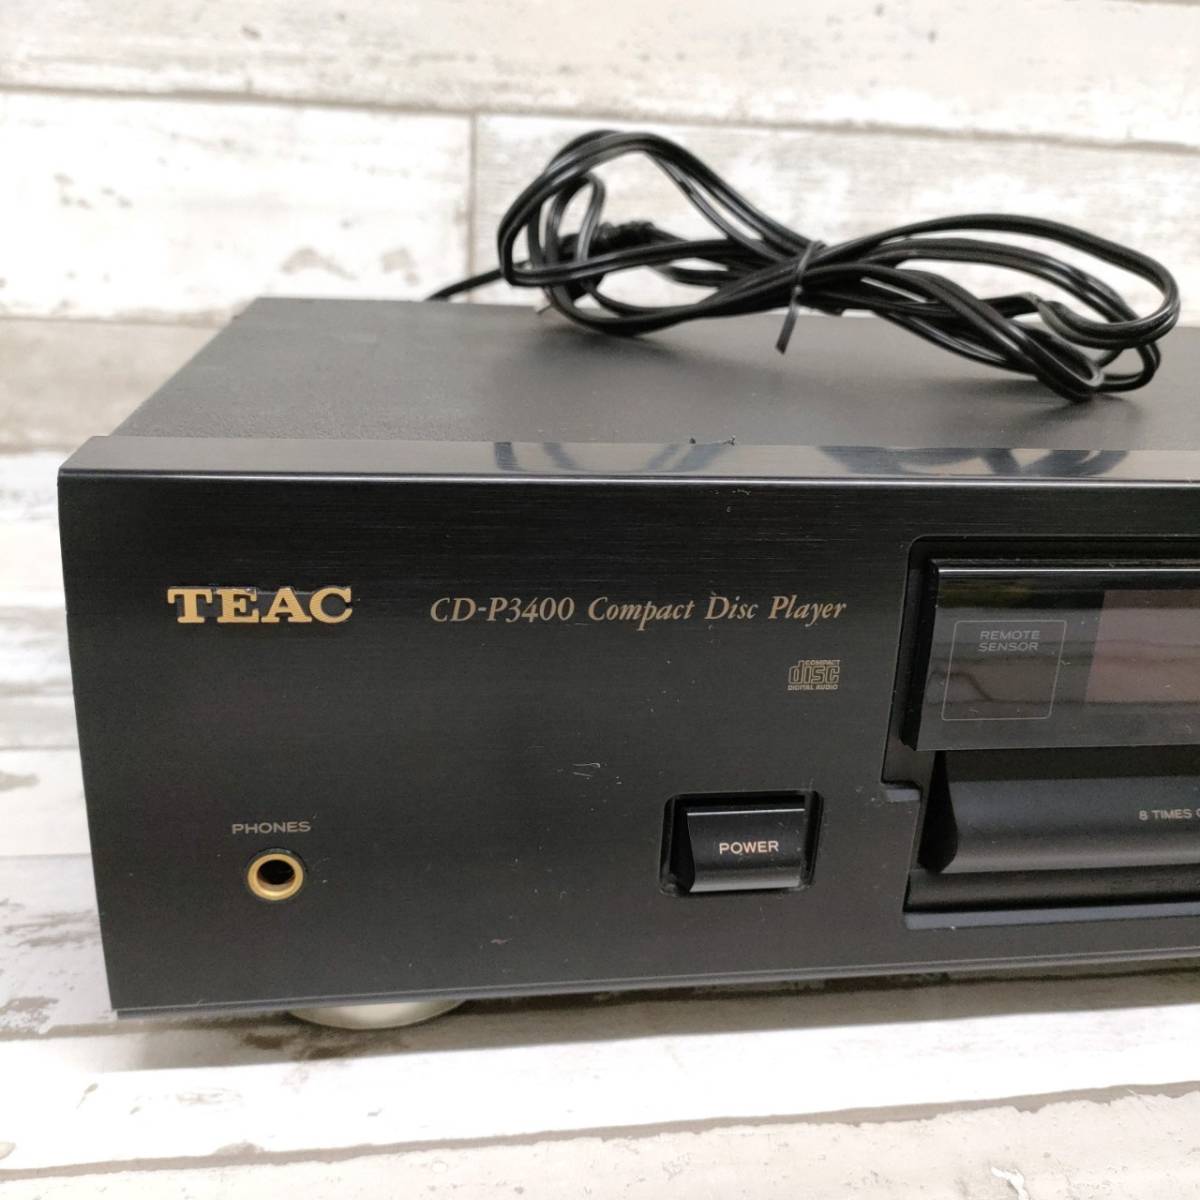 TEAC CD-P3400 Compact Disc Player ティアック CD プレーヤー 黒 動作品_画像2